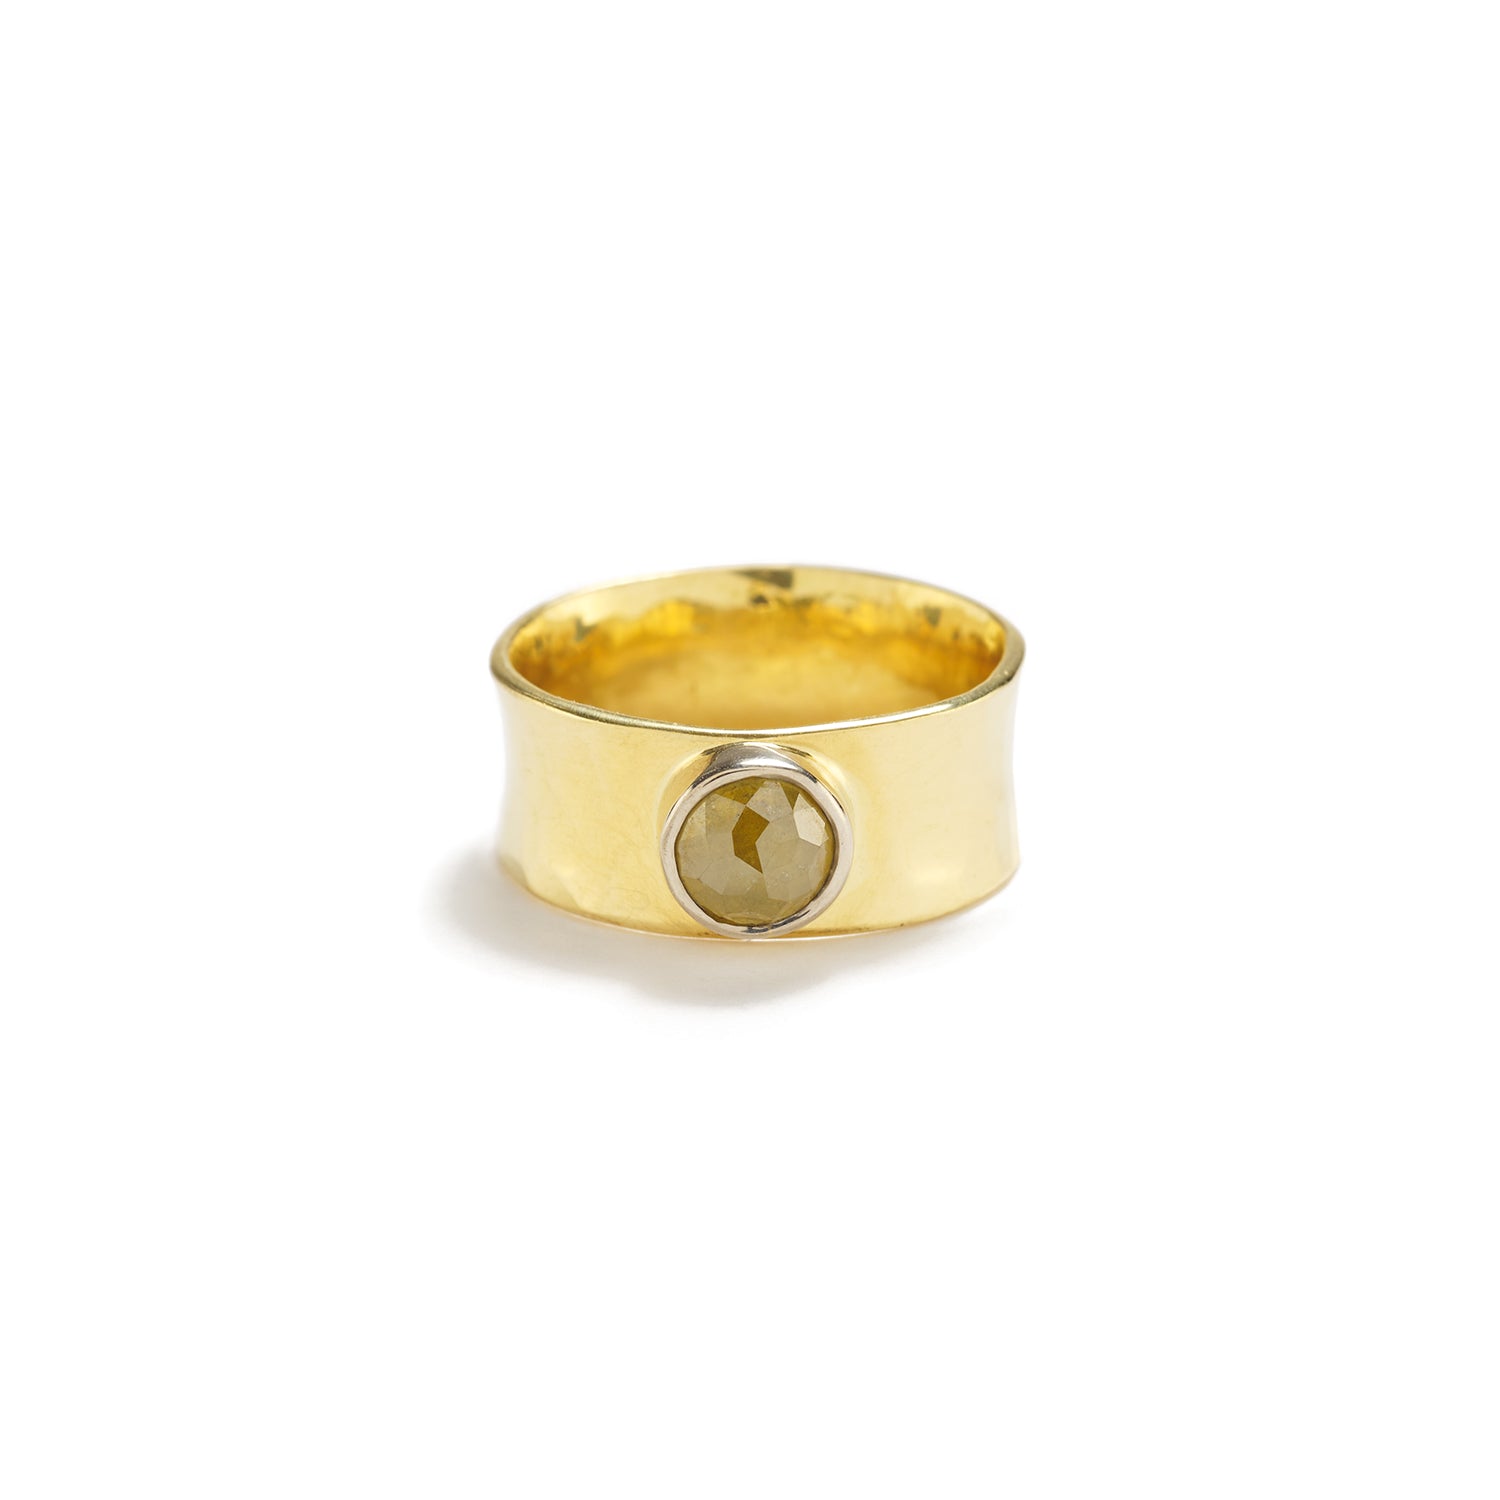 Ring with Yellow Rose Cut Diamond